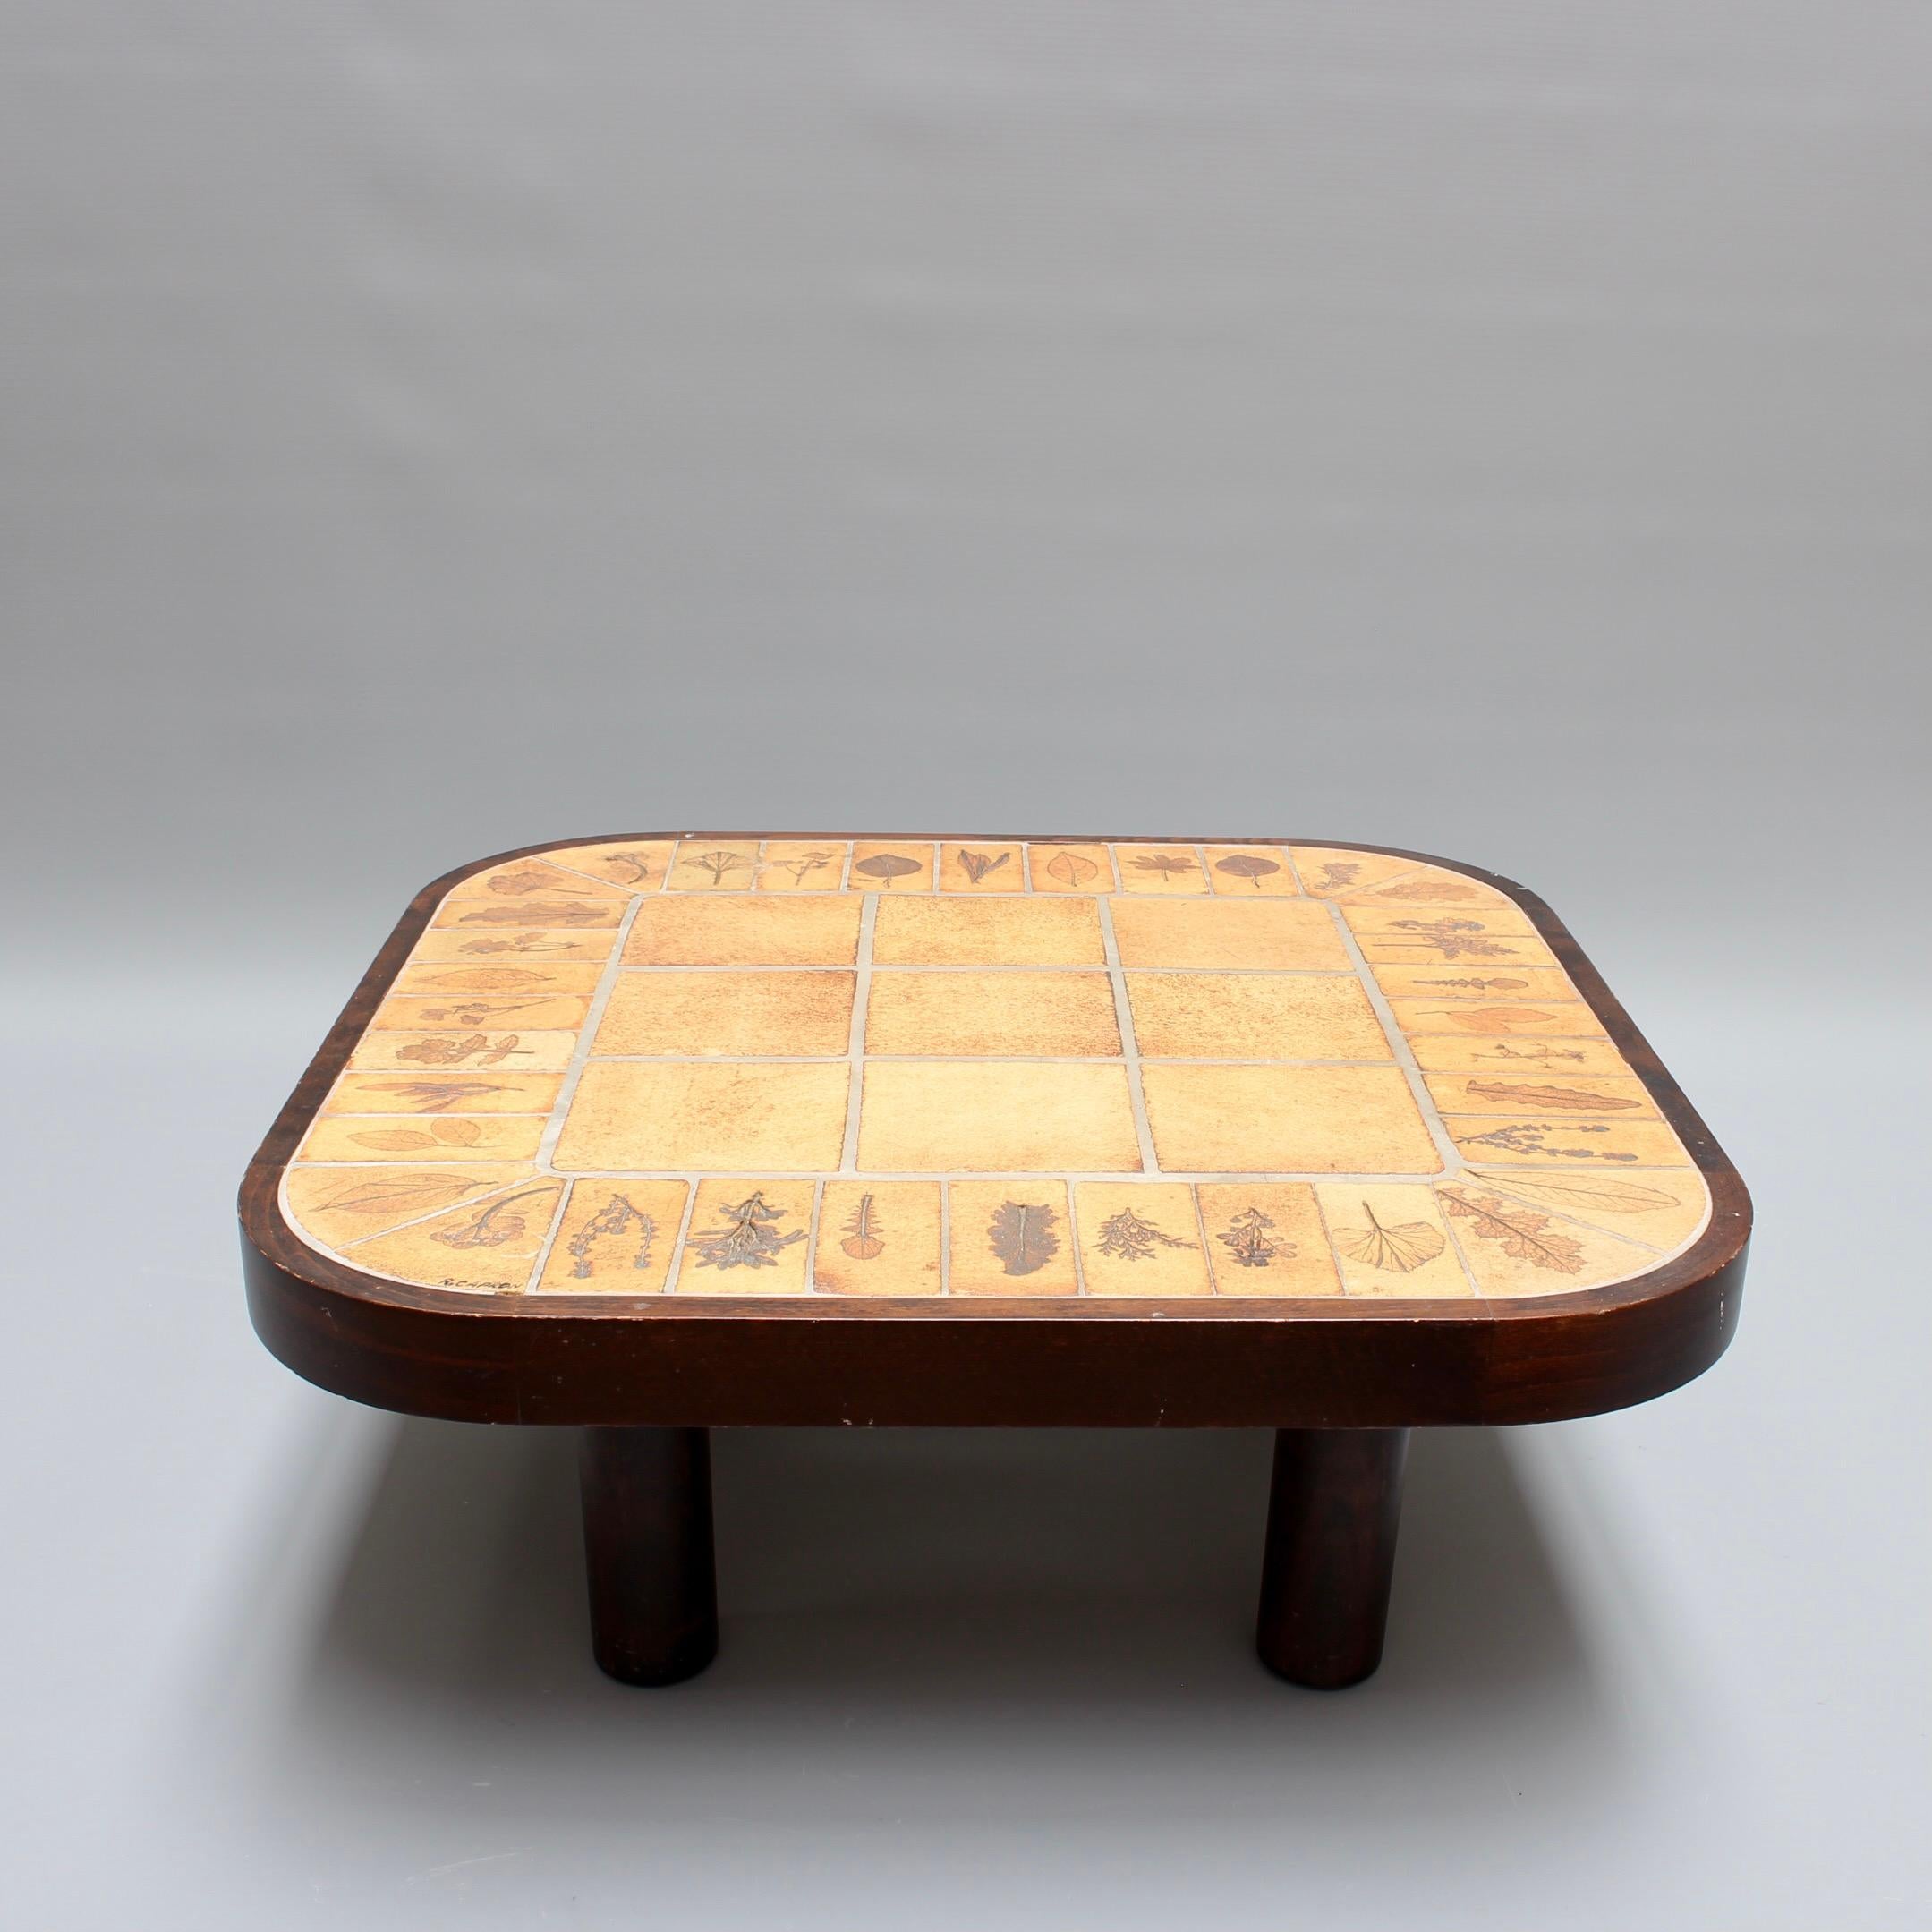 Coffee table with decorative earthenware tiles in leaf motif by Roger Capron (circa 1970s). This charming table is a quintessential example of collectible Capron. There are nature-themed tiles with a variety of beautiful leaves impressed into the